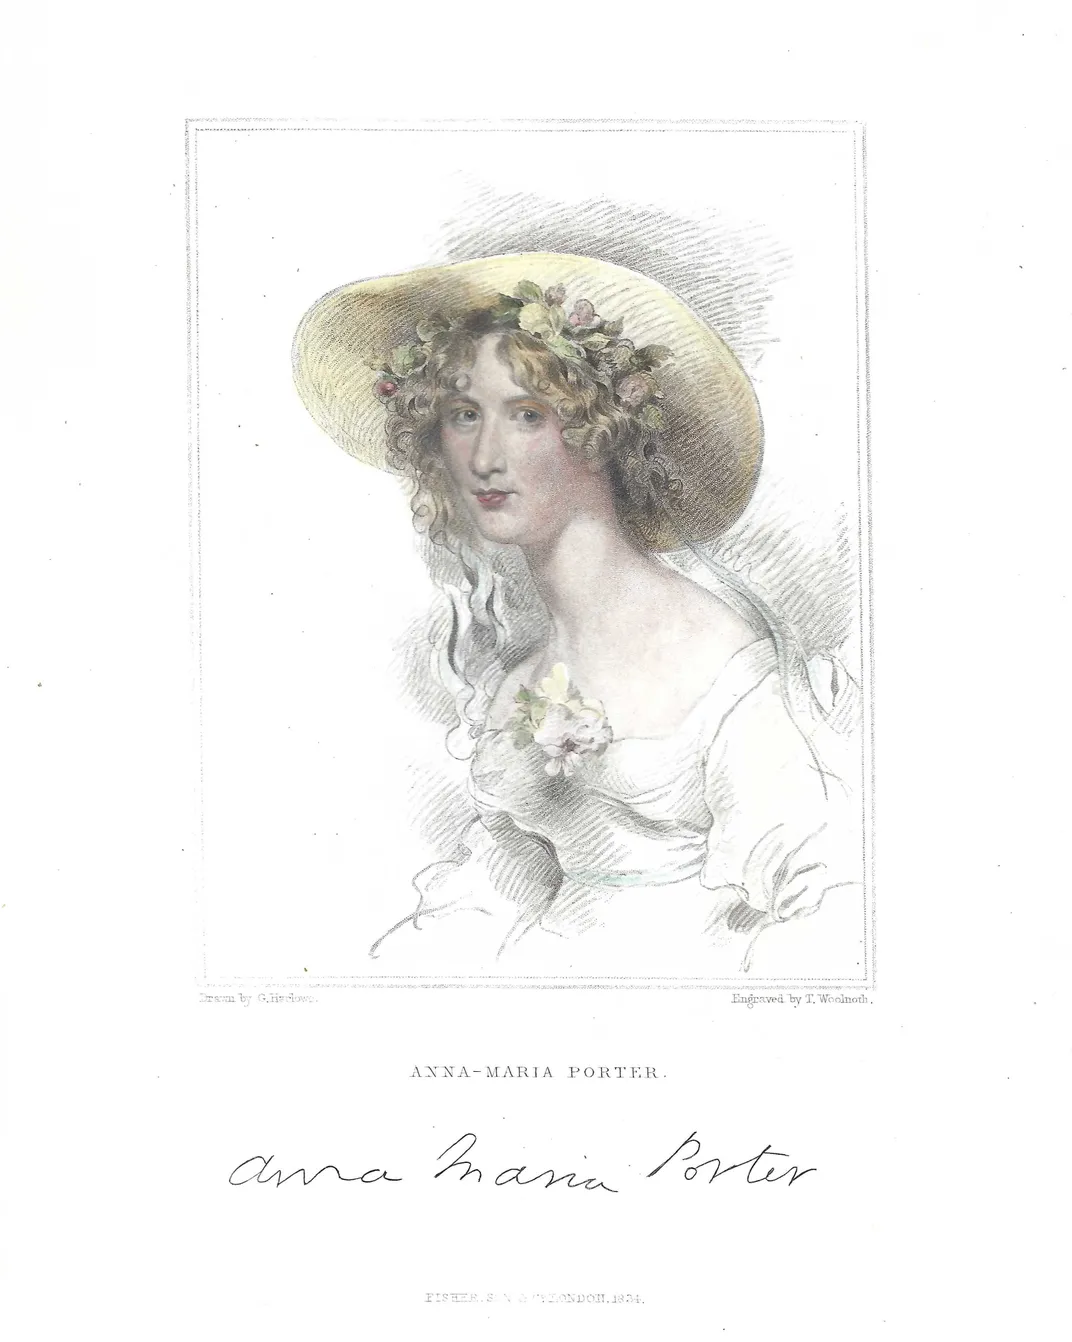 Thomas Woolnoth, after George Henry Harlow, Portrait of Anna Maria Porter, 1834